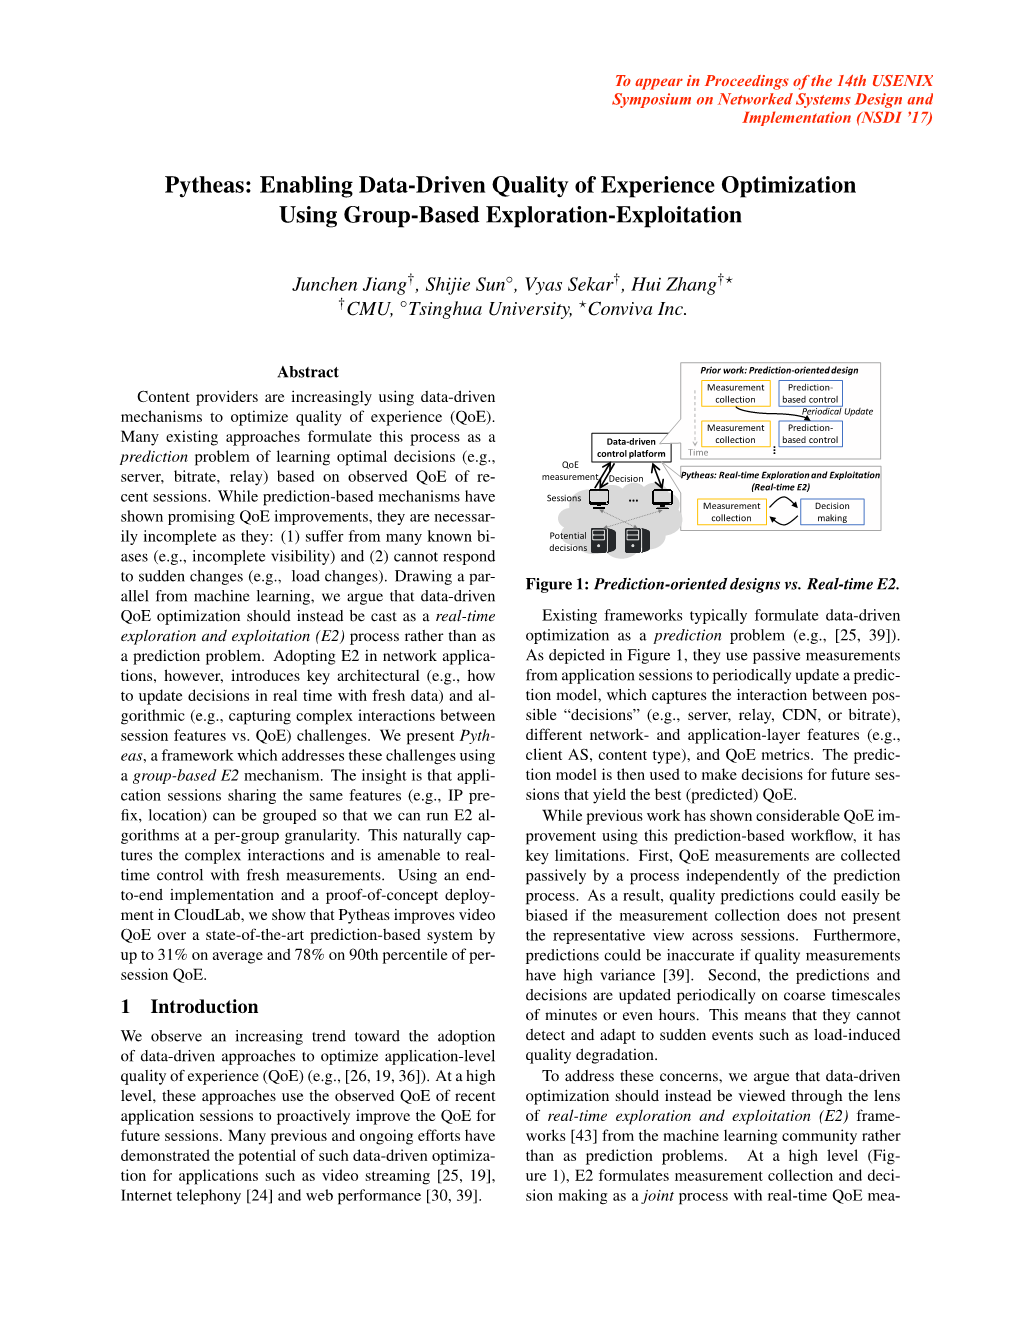 Pytheas: Enabling Data-Driven Quality of Experience Optimization Using Group-Based Exploration-Exploitation